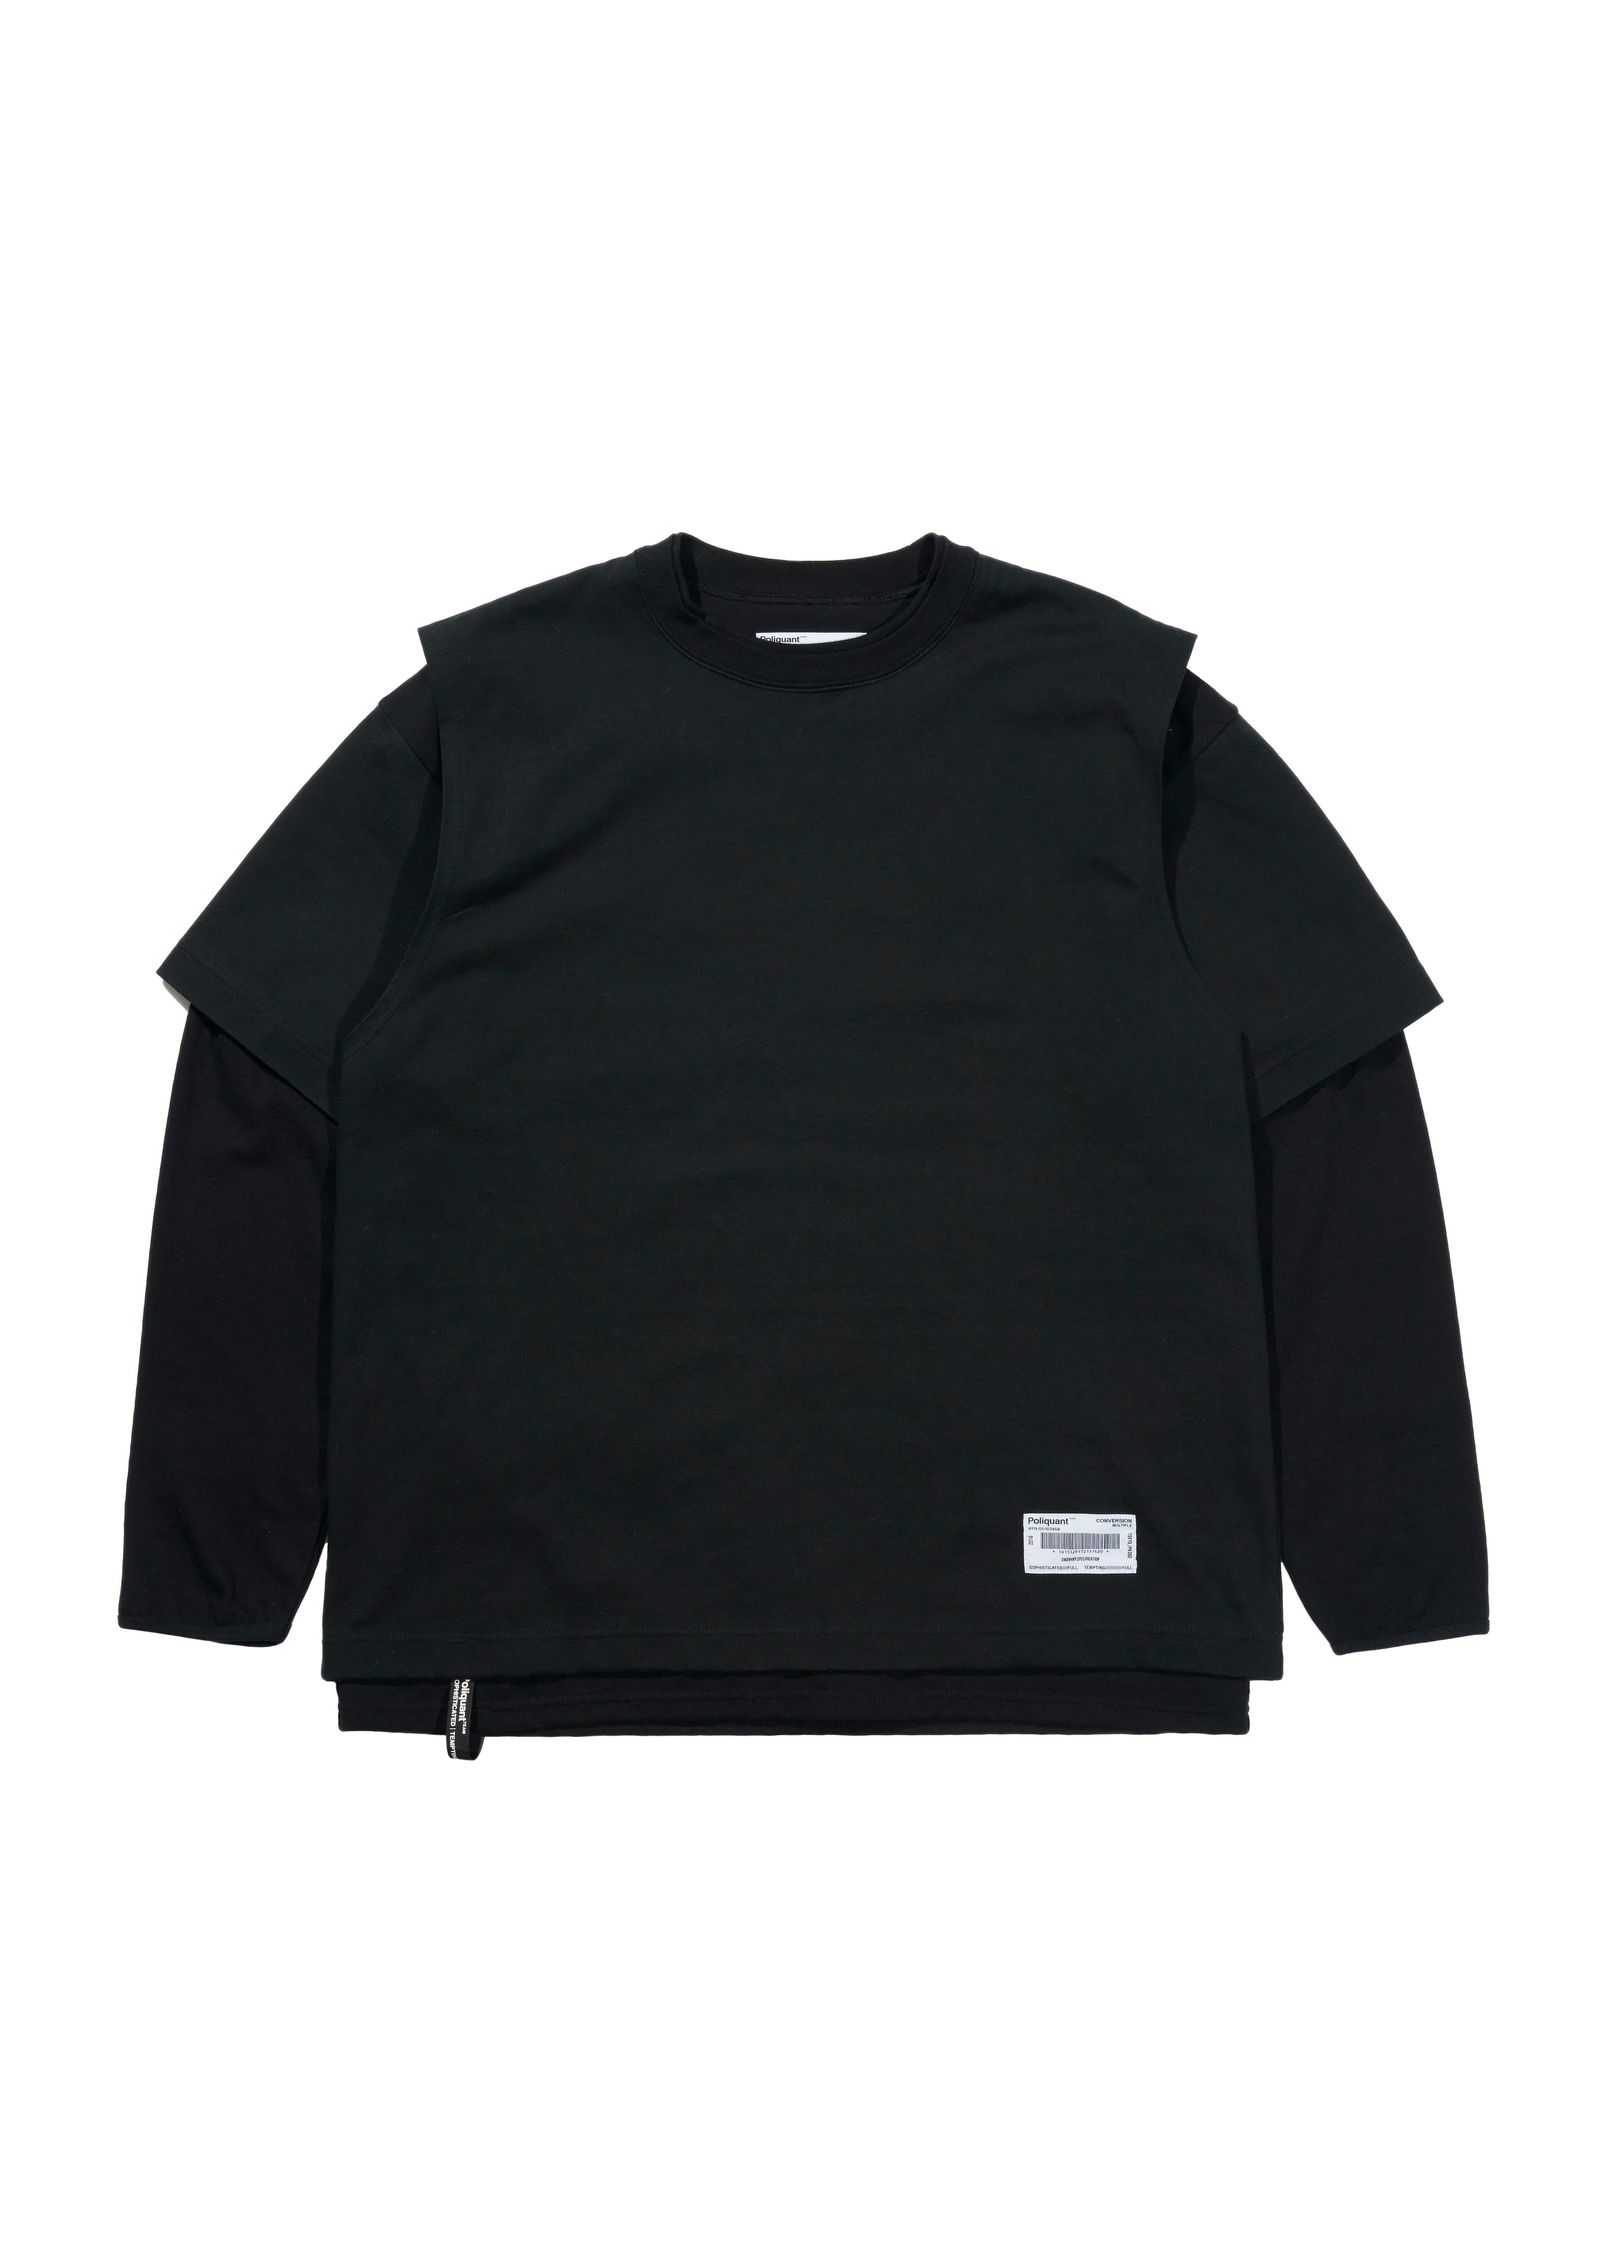 POLIQUANT - THE SWITCHING LAYERED L/S TEE / レイヤード ロング 